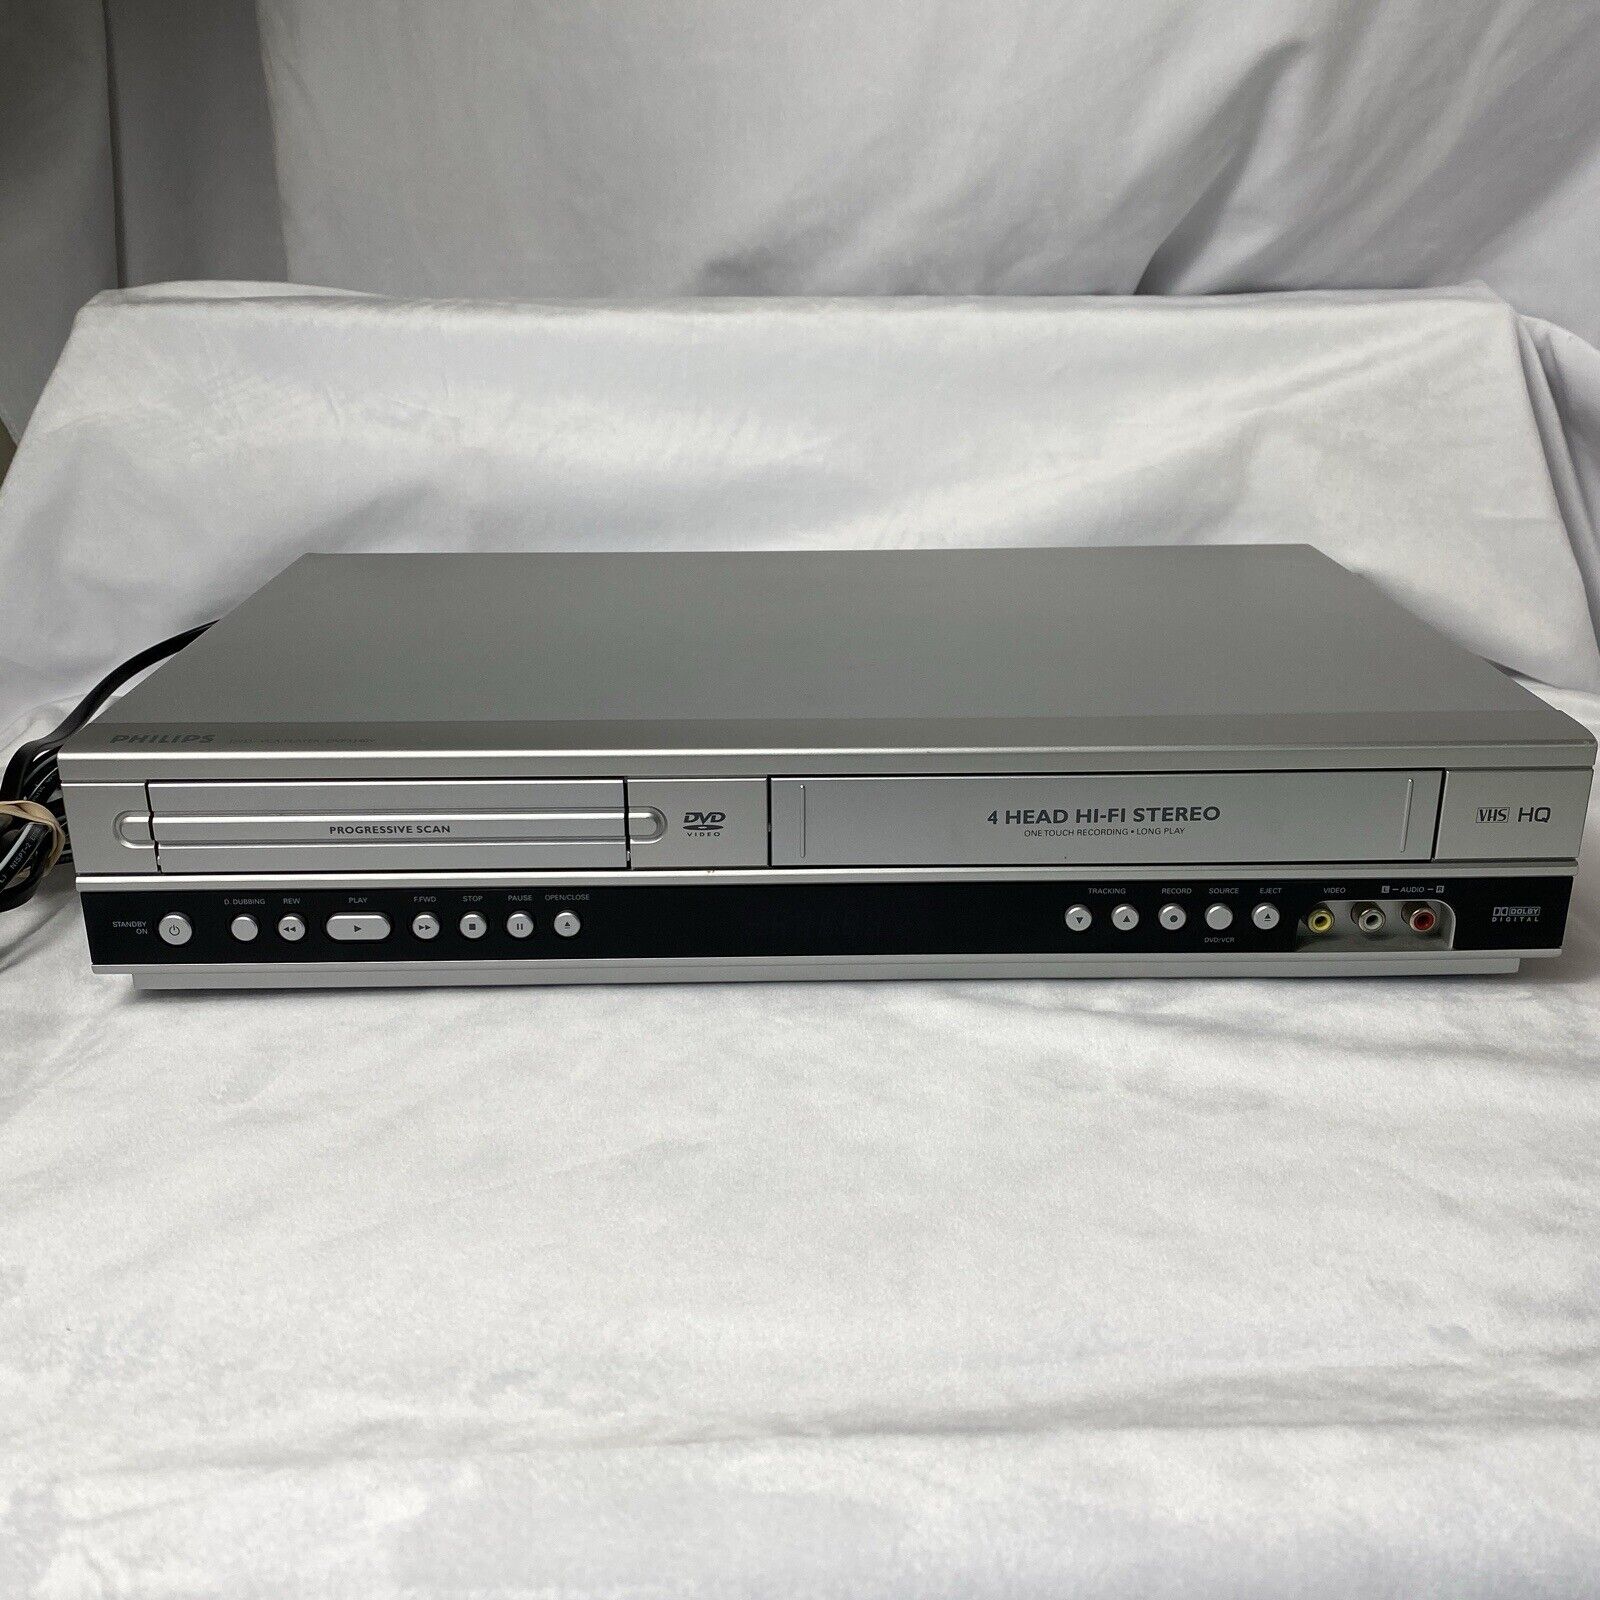 Philips DVP3340V/17 DVD VCR VHS Combo Player Recorder Tested Working NO REMOTE